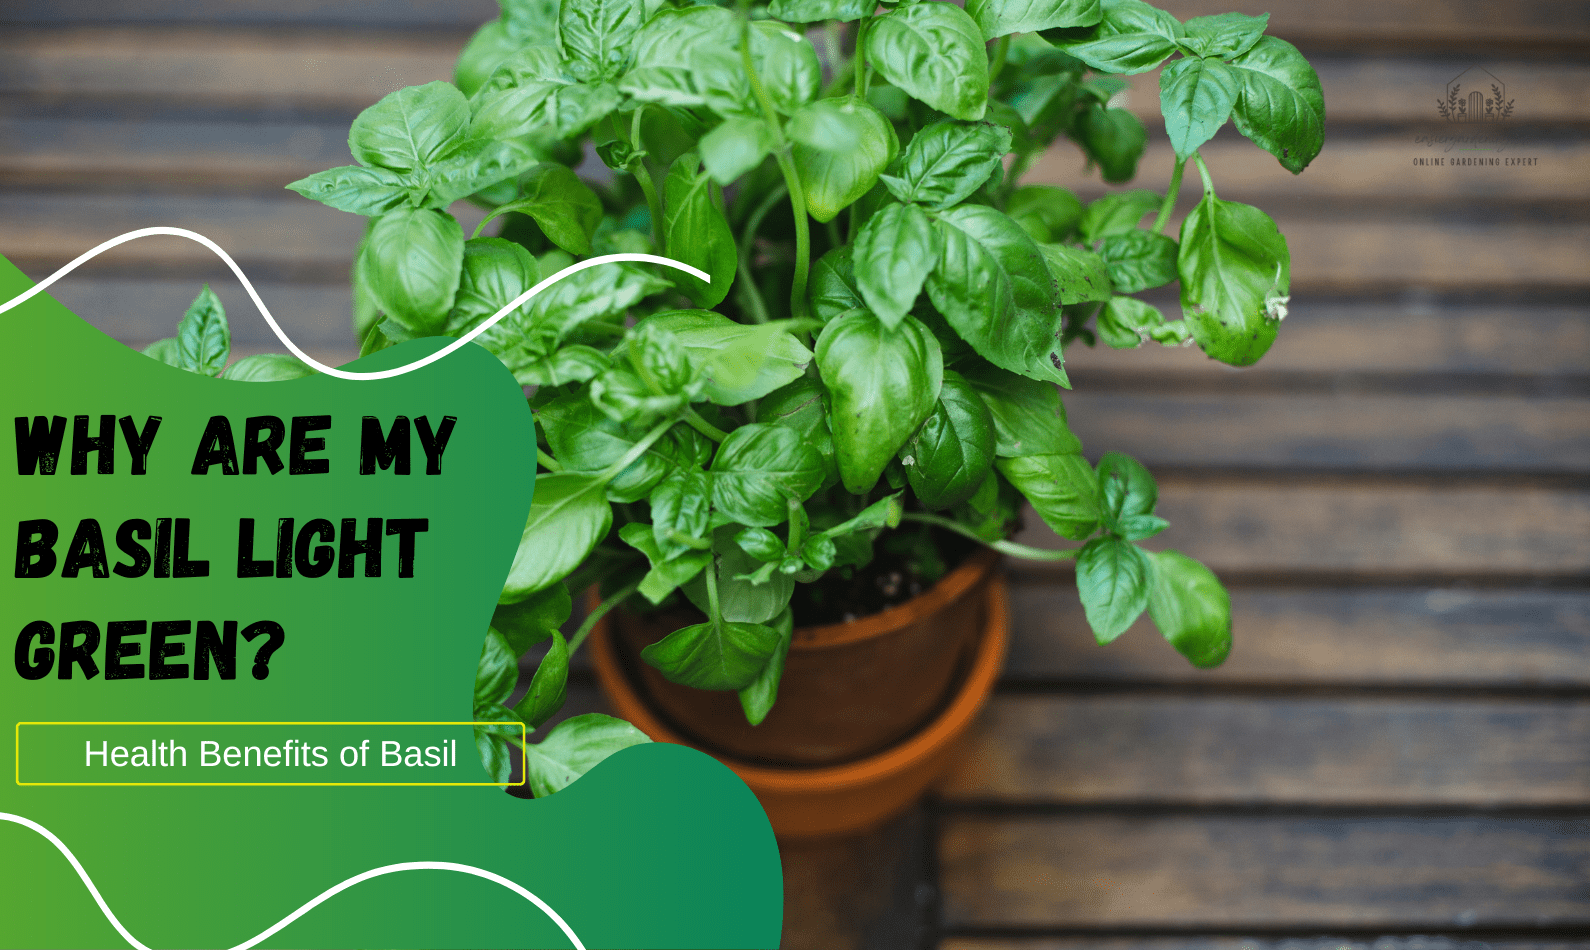 Why are my Basil Light Green?